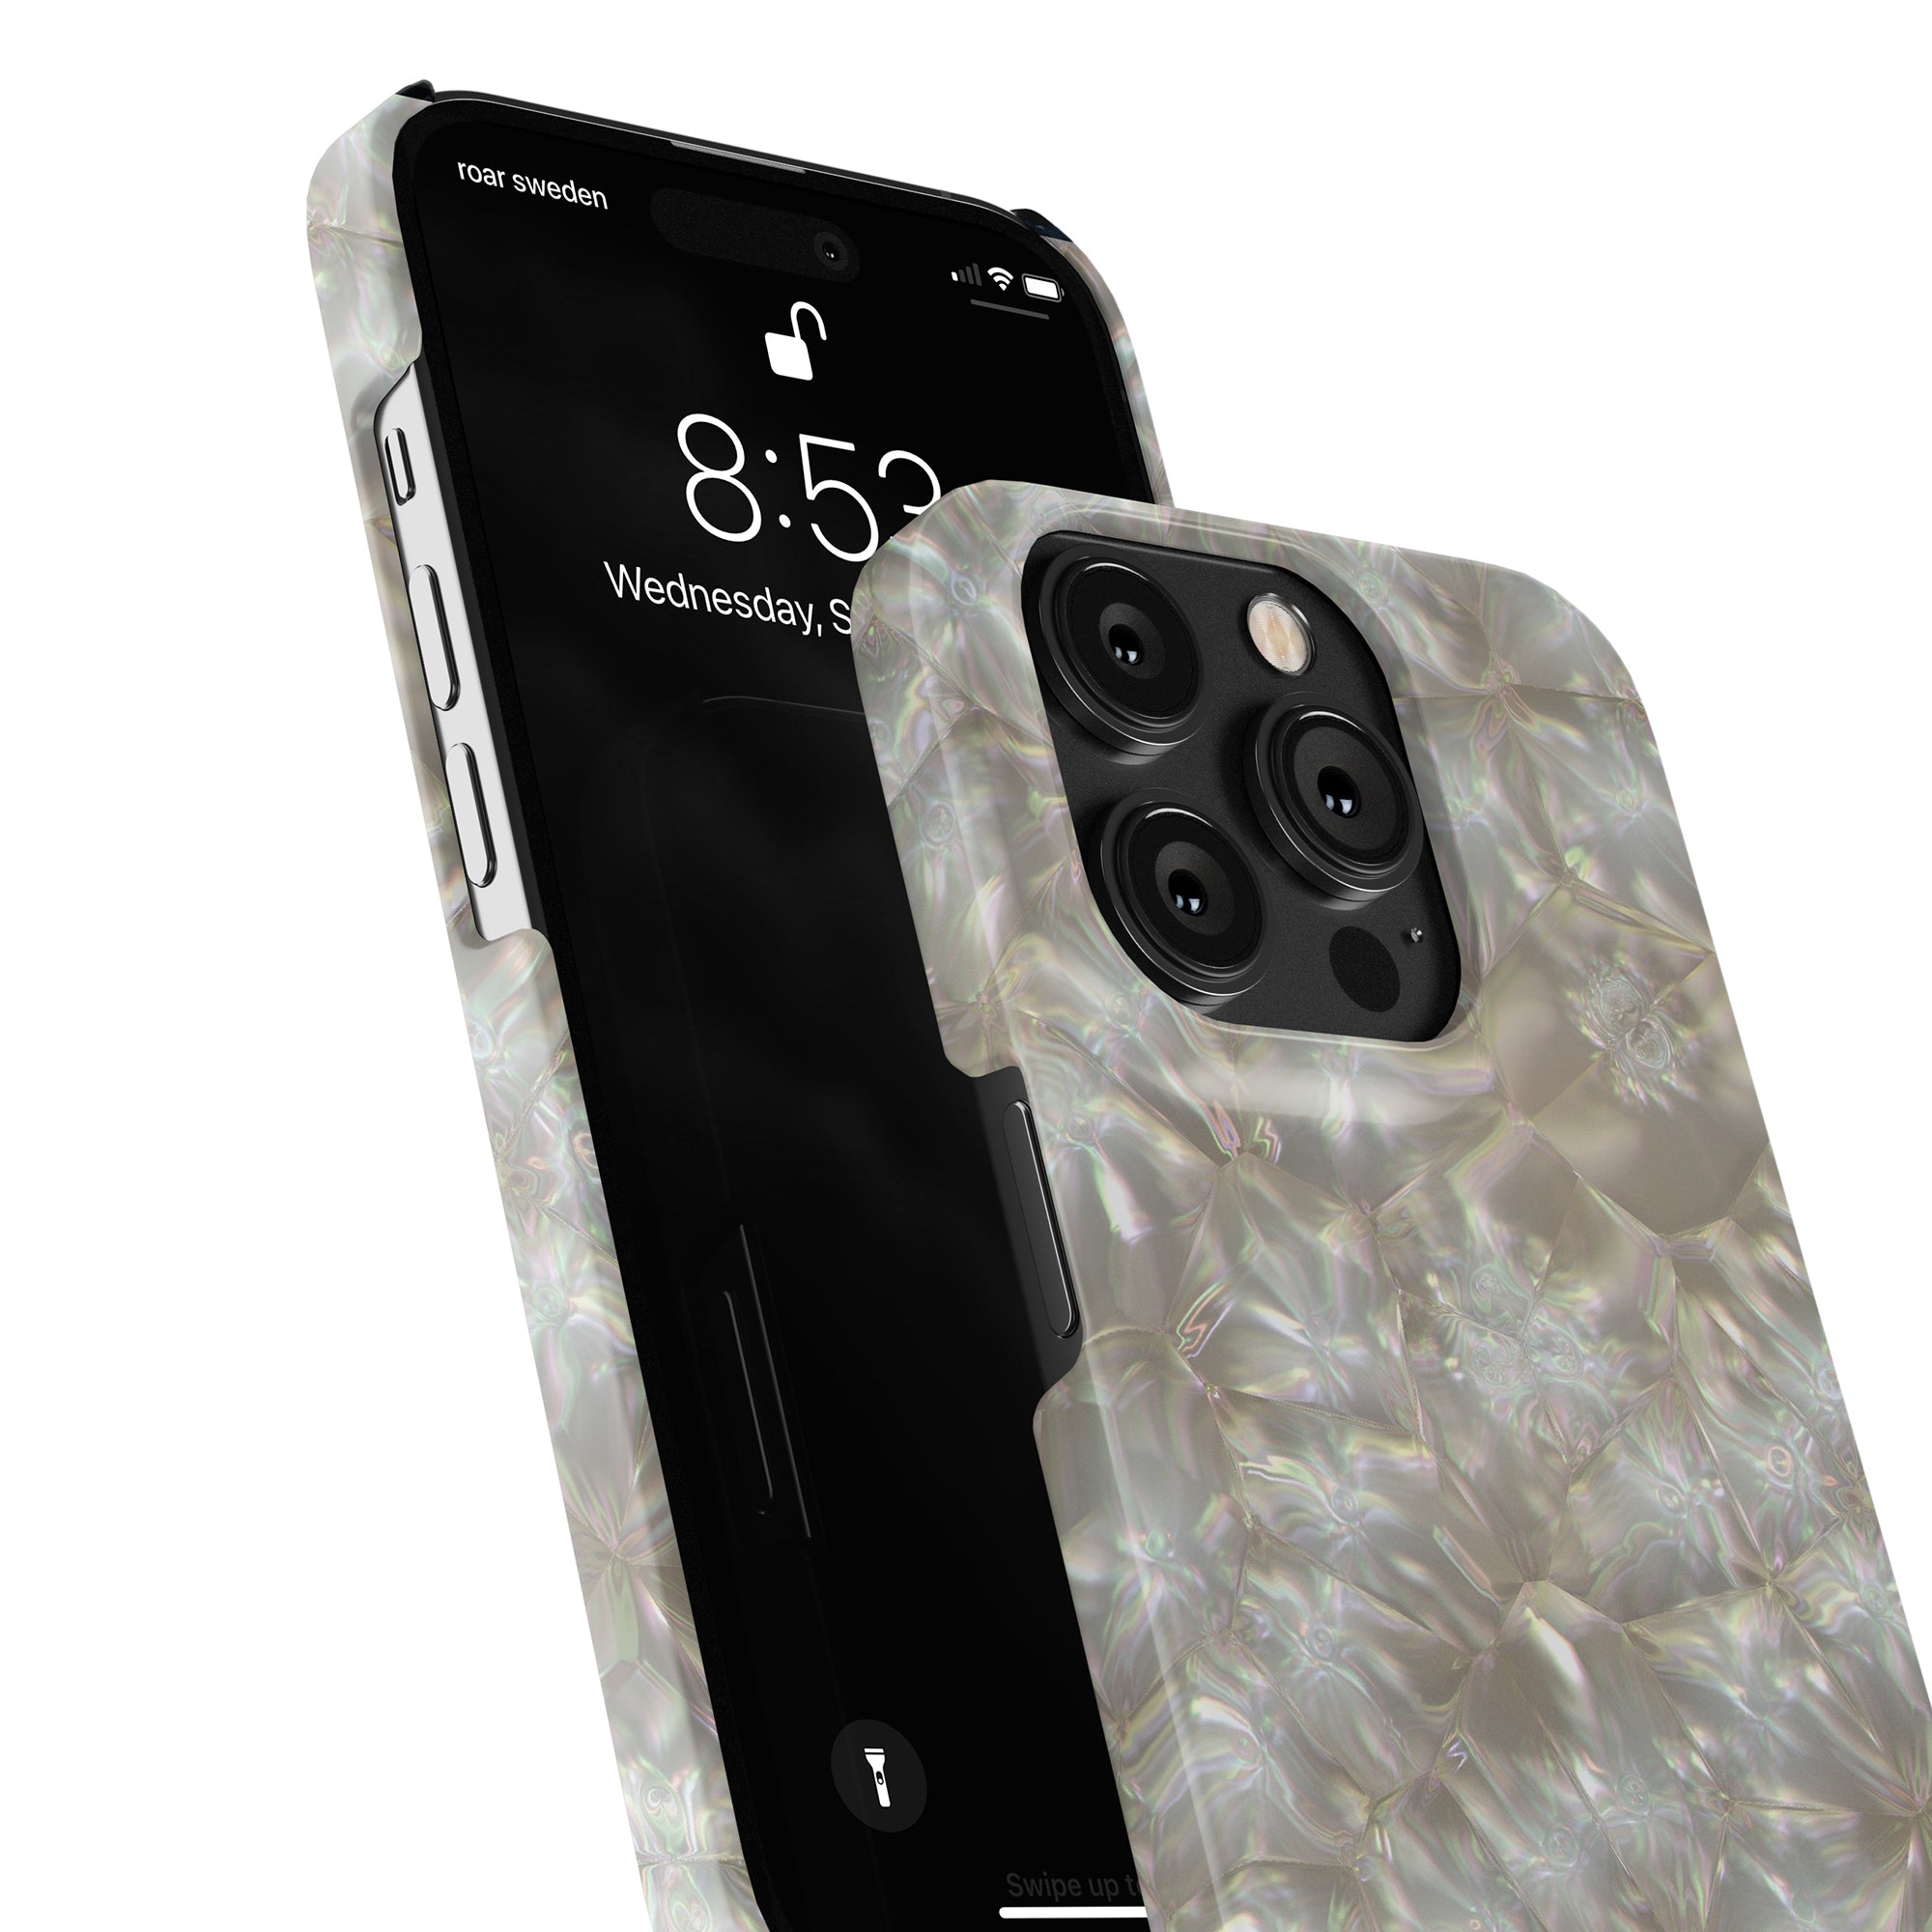 Two smartphones, one in a Pearls - Slim case from the Oyster Collection, showing camera details and a visible lock screen with time and date.